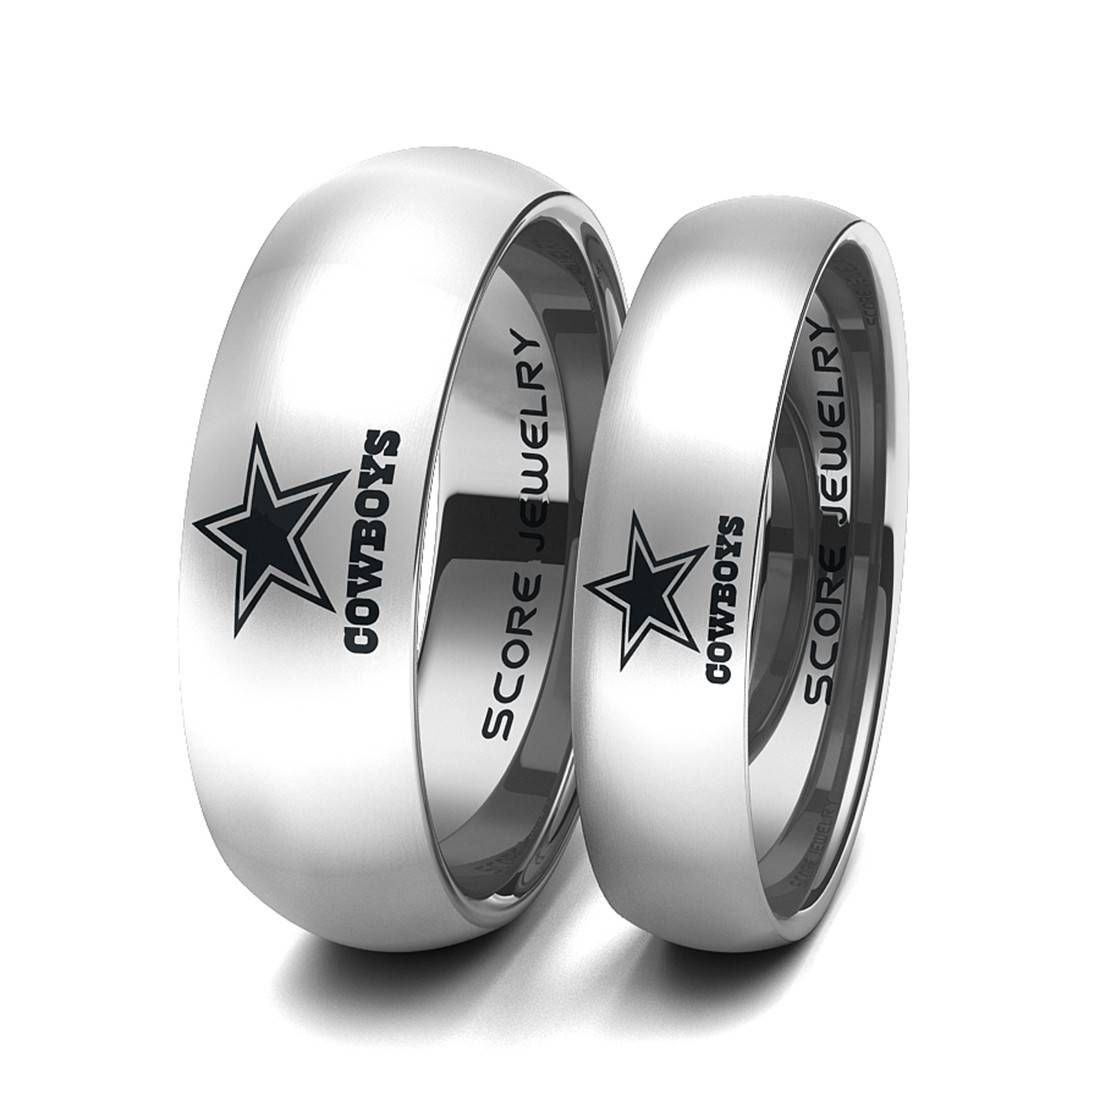 8mm Tungsten Band With Beveled Edge And Brushed Finish Nfl Regarding Dallas Cowboys Wedding Bands (View 5 of 15)